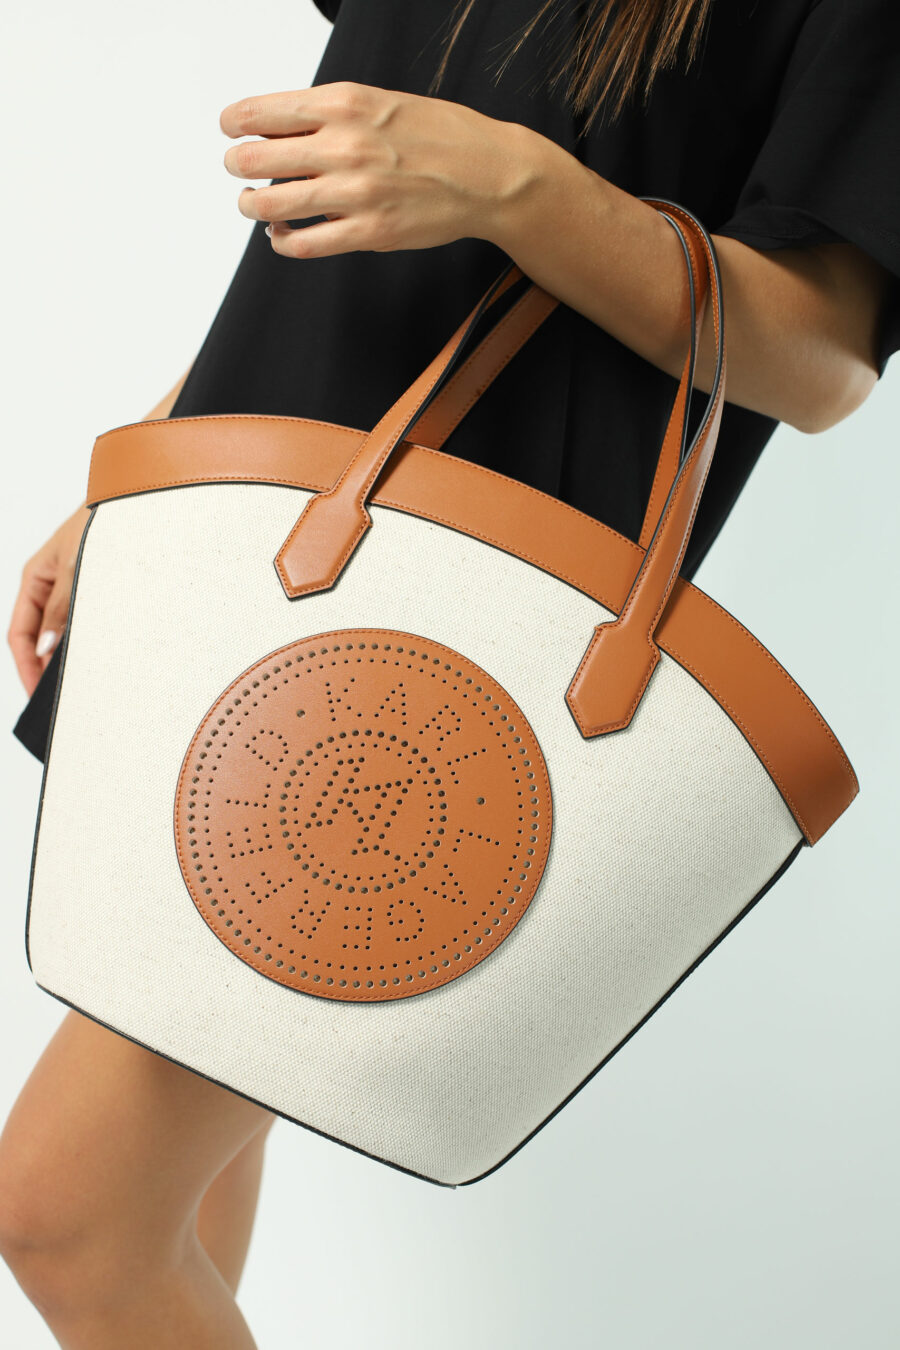 Tote bag white with brown and "k/tulip" logo - Photos 2834